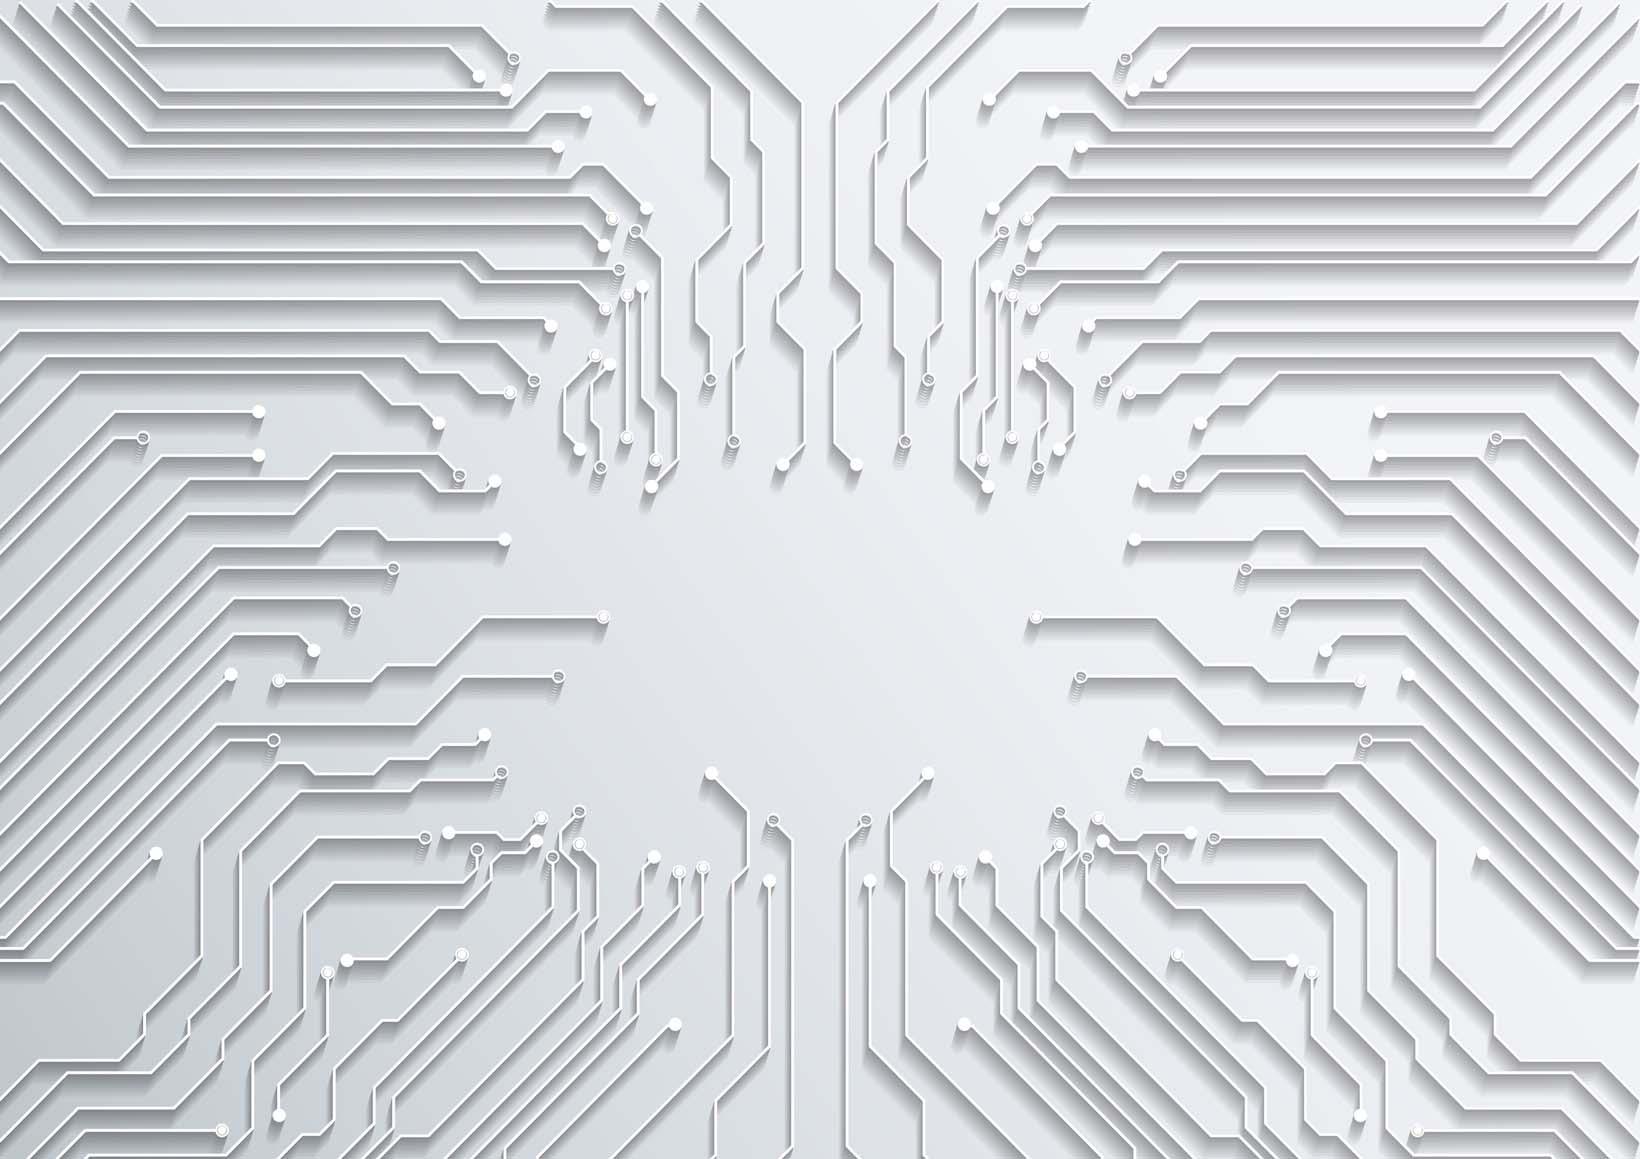 Product abstract technology background - circuit board texture vector - Axellence GmbH image